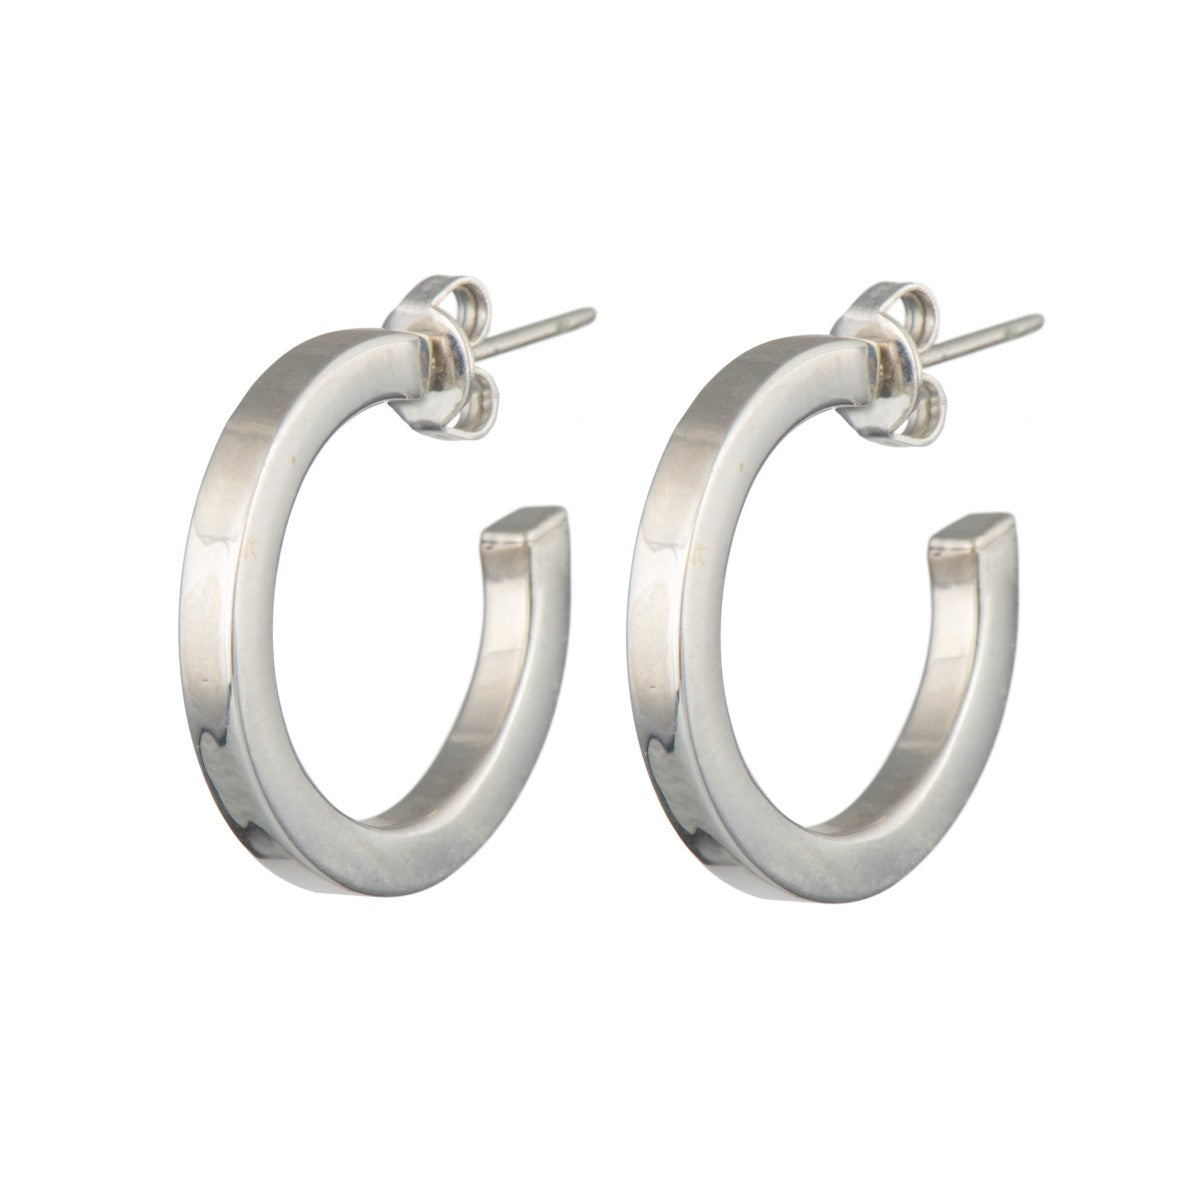 Sterling Silver Hoop Earrings with a Flat Square Edge